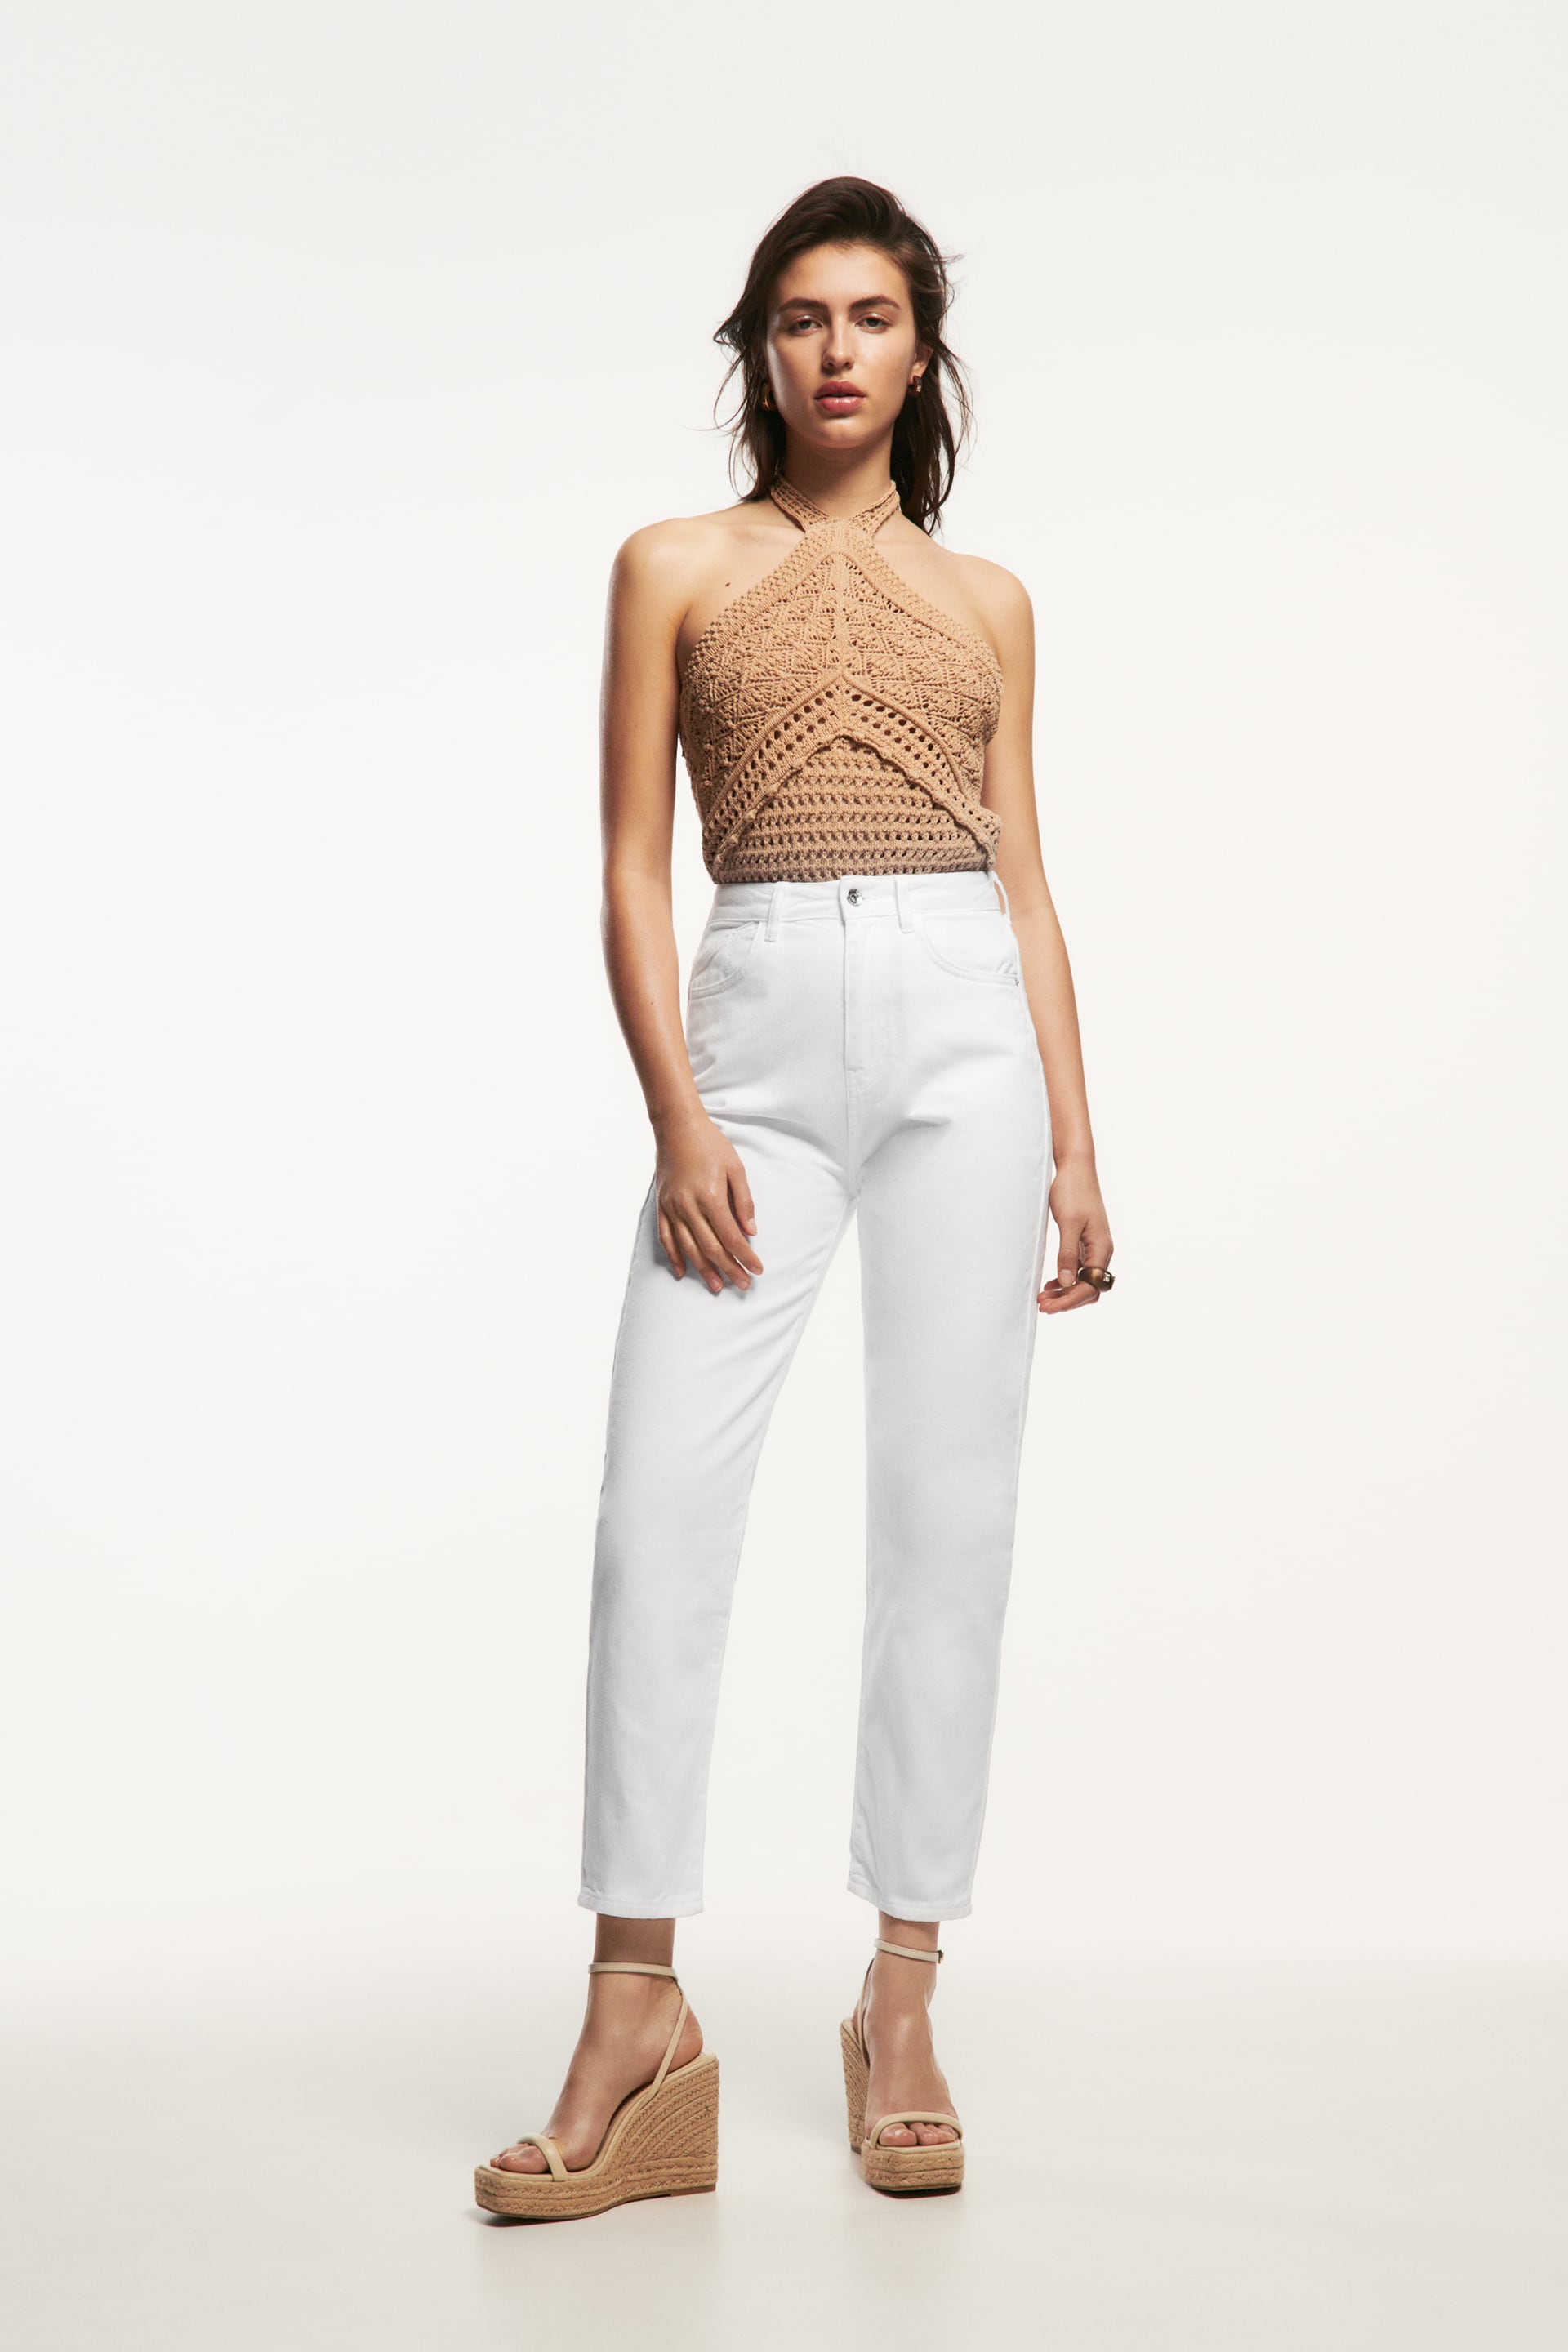 Zara high rise 'mom fit' white jeans - new